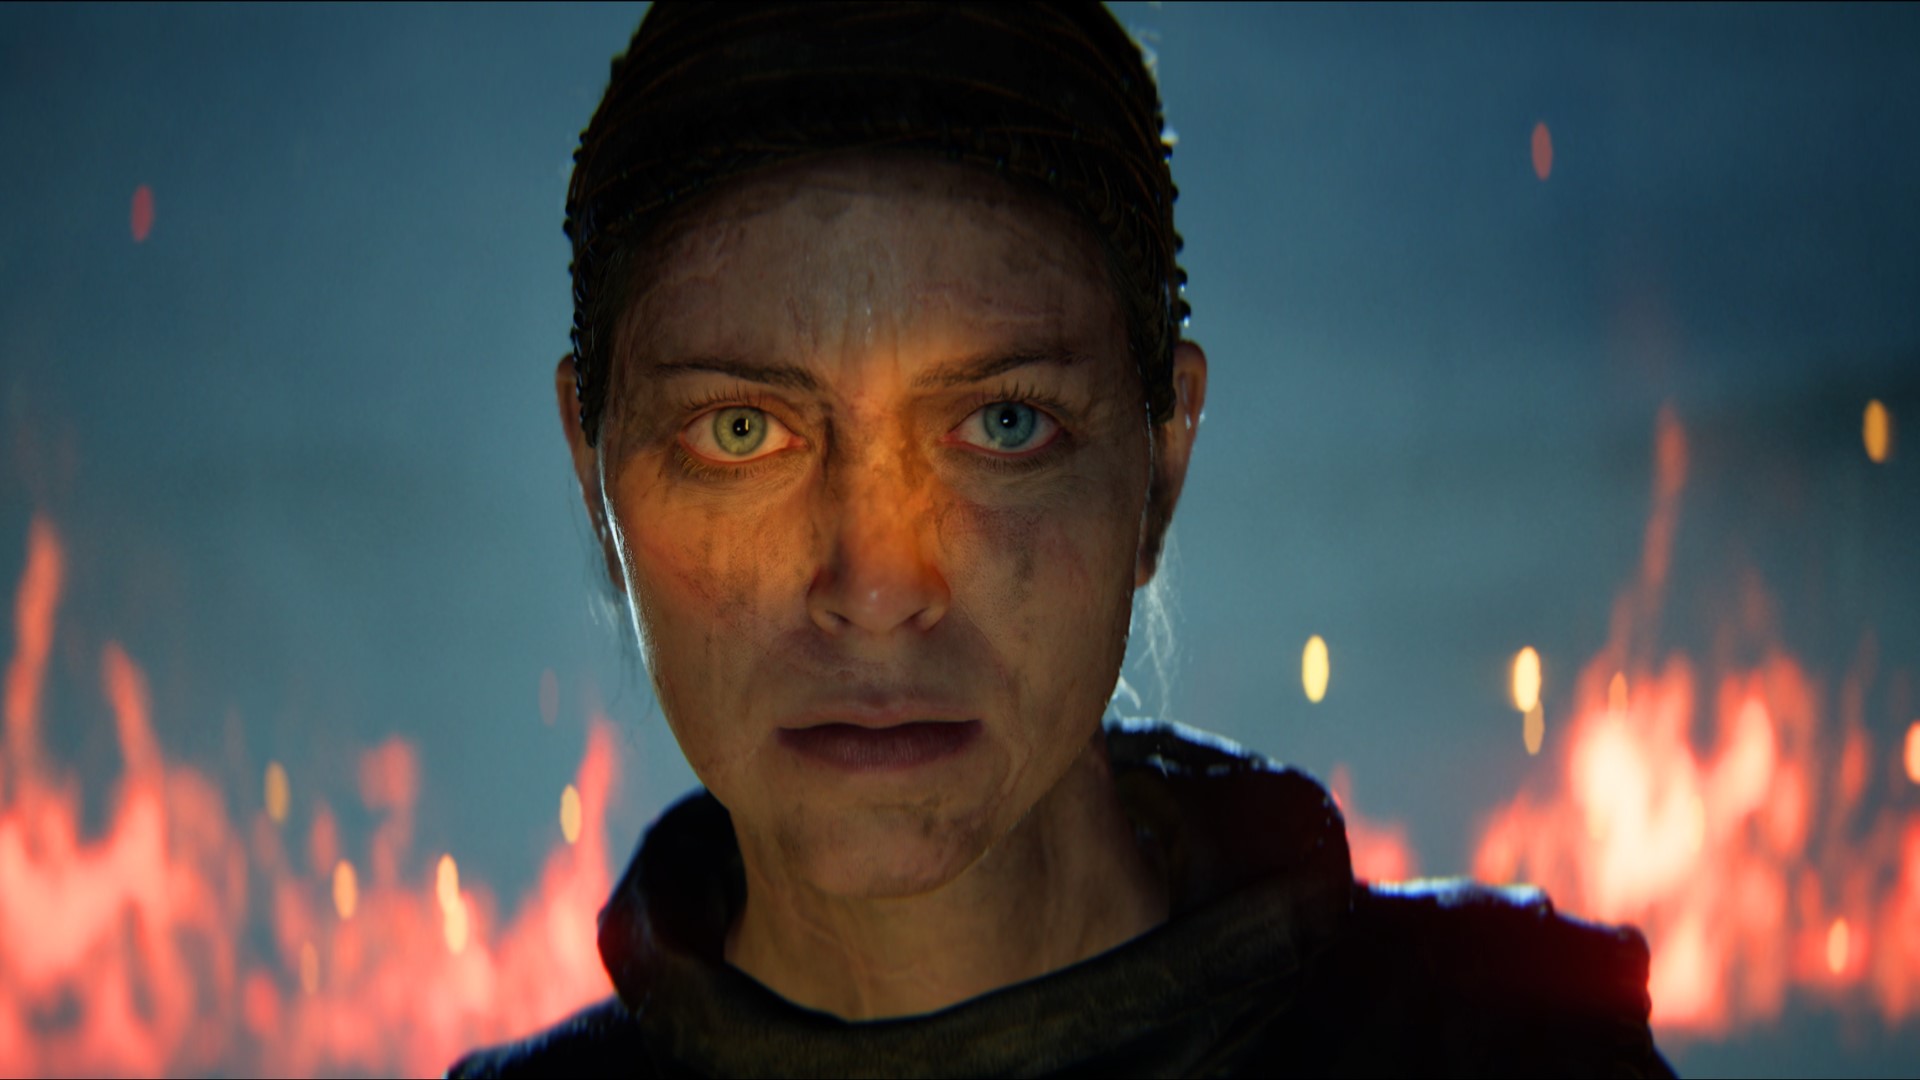 Hellblade 2 Failed To Impress Commercially Despite Insane Graphics Realism